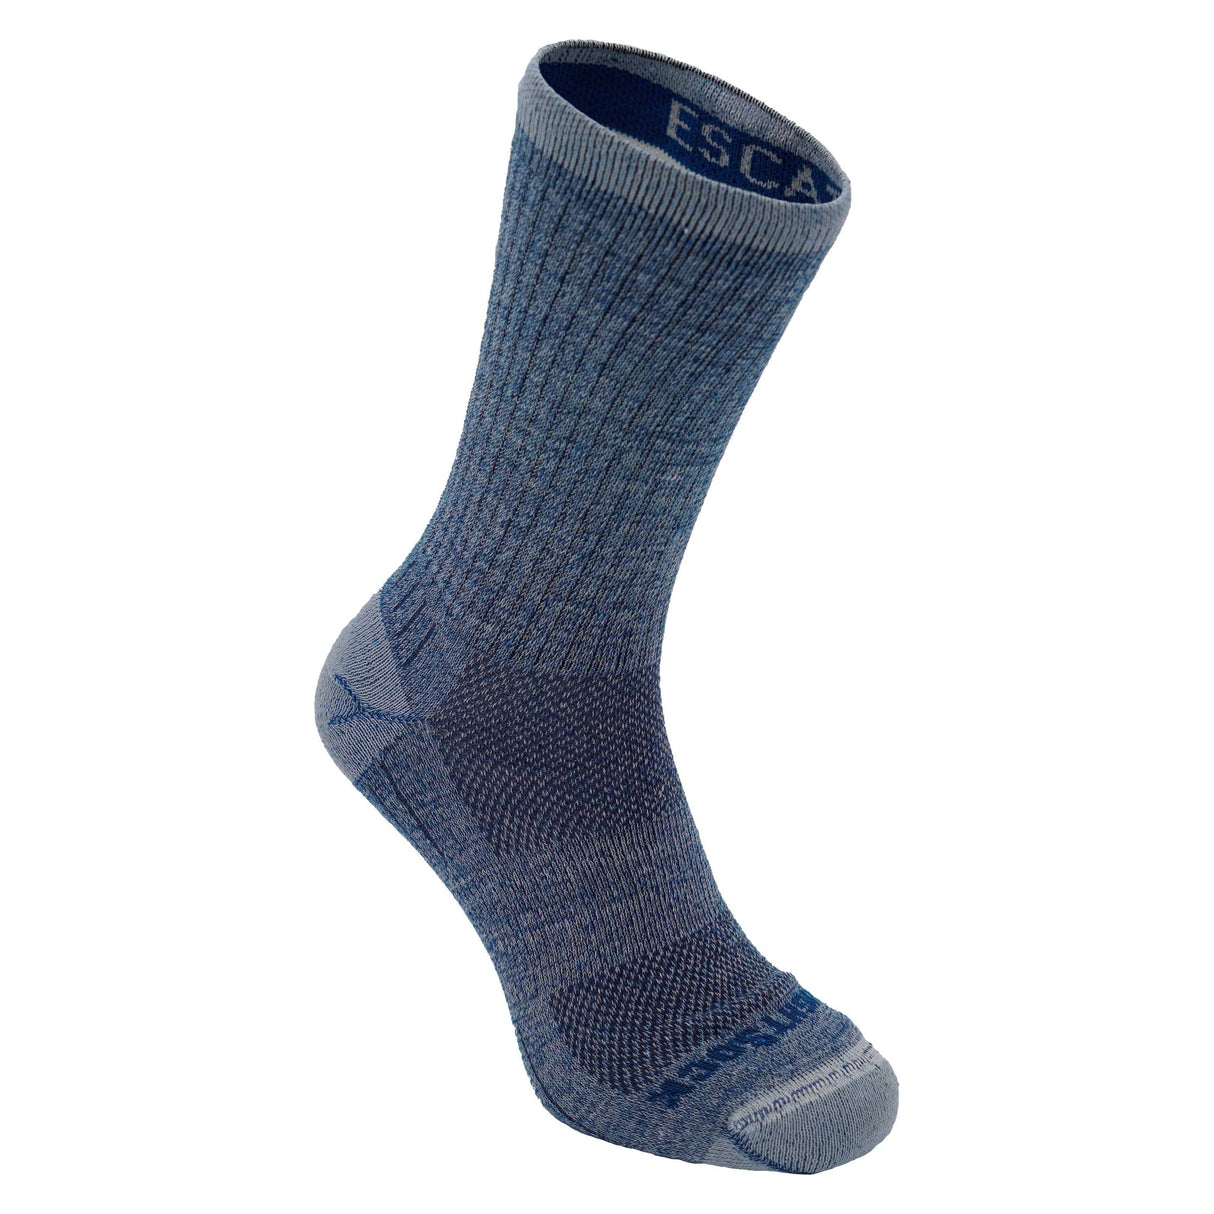 Wrightsock Double-Layer Escape Midweight Crew Socks  - 